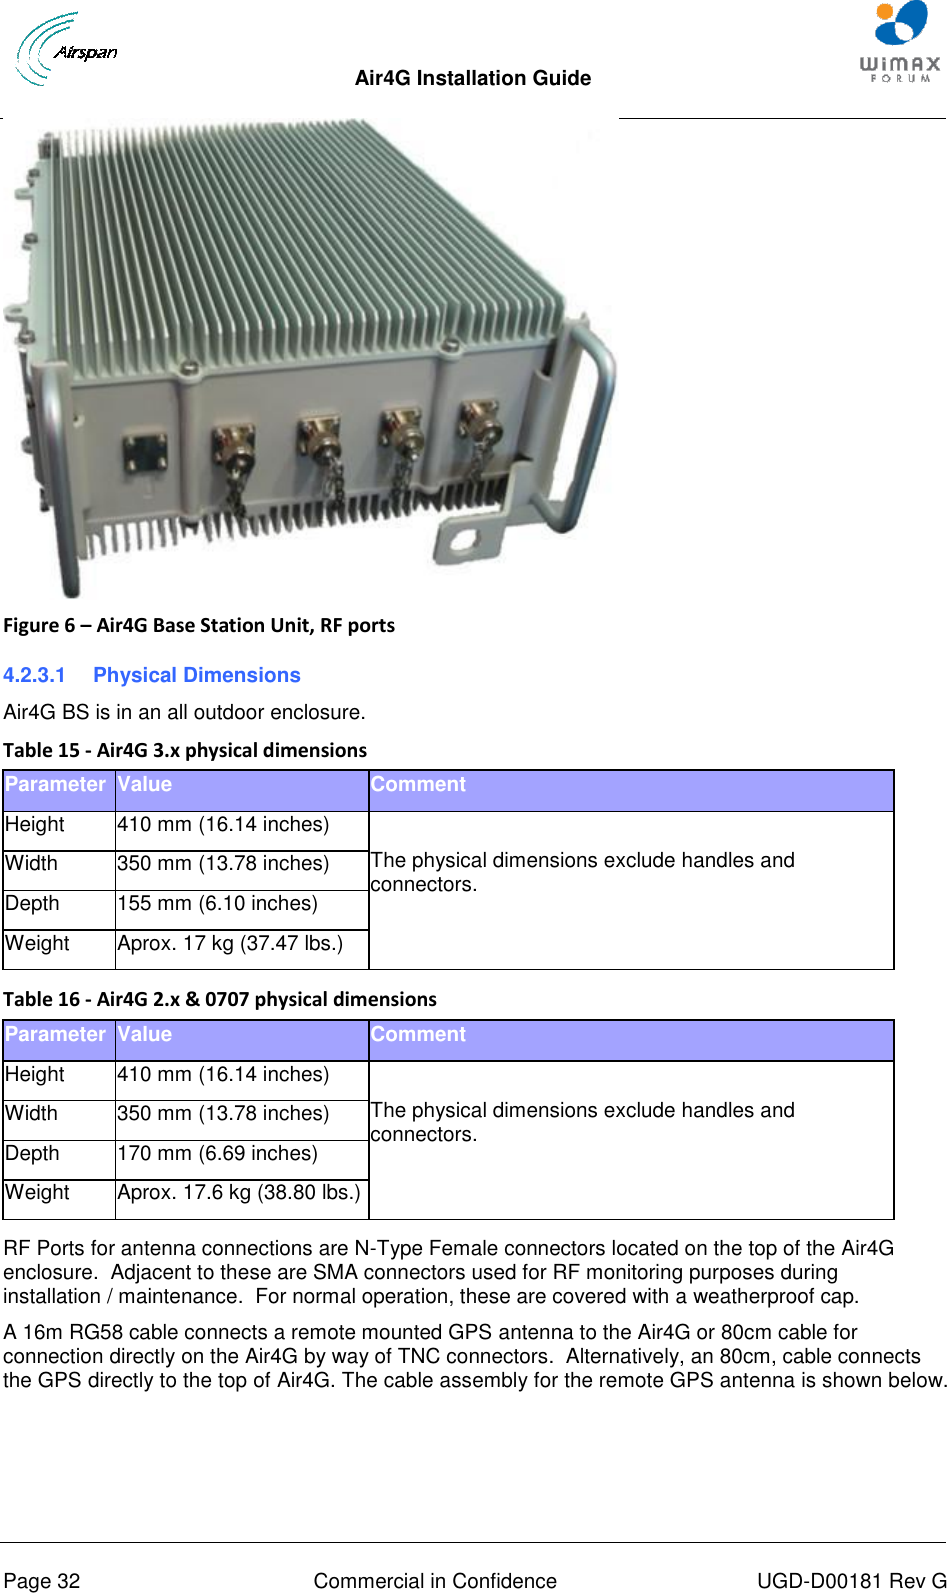  Air4G Installation Guide       Page 32  Commercial in Confidence  UGD-D00181 Rev G  Figure 6 – Air4G Base Station Unit, RF ports 4.2.3.1  Physical Dimensions Air4G BS is in an all outdoor enclosure. Table 15 - Air4G 3.x physical dimensions Parameter Value Comment Height 410 mm (16.14 inches)  The physical dimensions exclude handles and connectors. Width 350 mm (13.78 inches) Depth 155 mm (6.10 inches) Weight Aprox. 17 kg (37.47 lbs.)  Table 16 - Air4G 2.x &amp; 0707 physical dimensions Parameter Value Comment Height 410 mm (16.14 inches)  The physical dimensions exclude handles and connectors. Width 350 mm (13.78 inches) Depth 170 mm (6.69 inches) Weight Aprox. 17.6 kg (38.80 lbs.)  RF Ports for antenna connections are N-Type Female connectors located on the top of the Air4G enclosure.  Adjacent to these are SMA connectors used for RF monitoring purposes during installation / maintenance.  For normal operation, these are covered with a weatherproof cap. A 16m RG58 cable connects a remote mounted GPS antenna to the Air4G or 80cm cable for connection directly on the Air4G by way of TNC connectors.  Alternatively, an 80cm, cable connects the GPS directly to the top of Air4G. The cable assembly for the remote GPS antenna is shown below.  